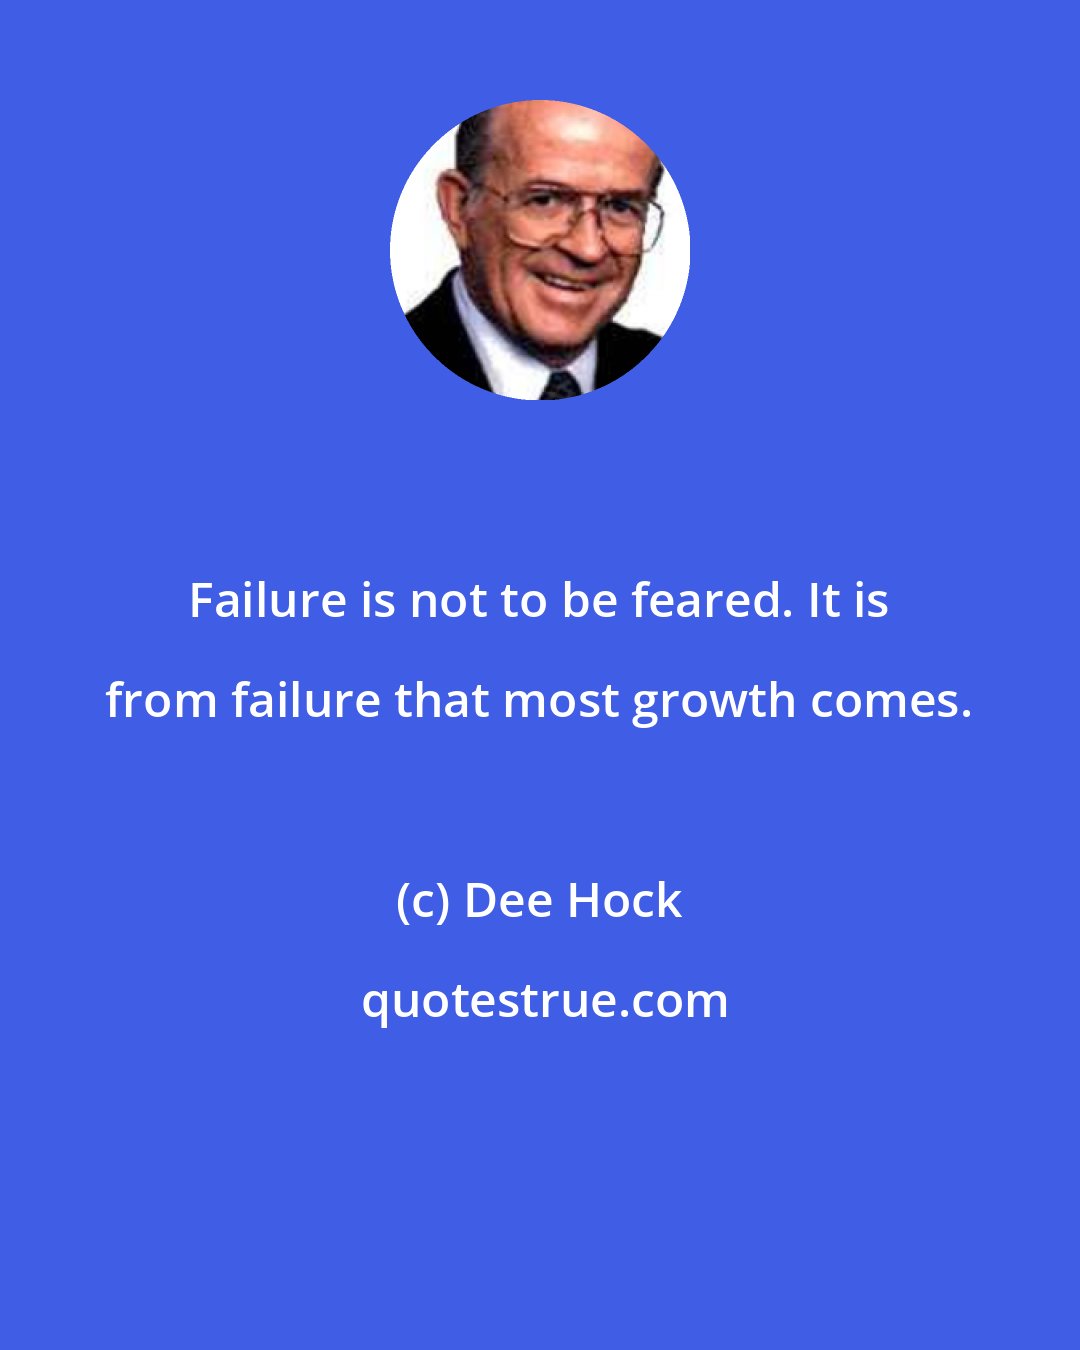 Dee Hock: Failure is not to be feared. It is from failure that most growth comes.